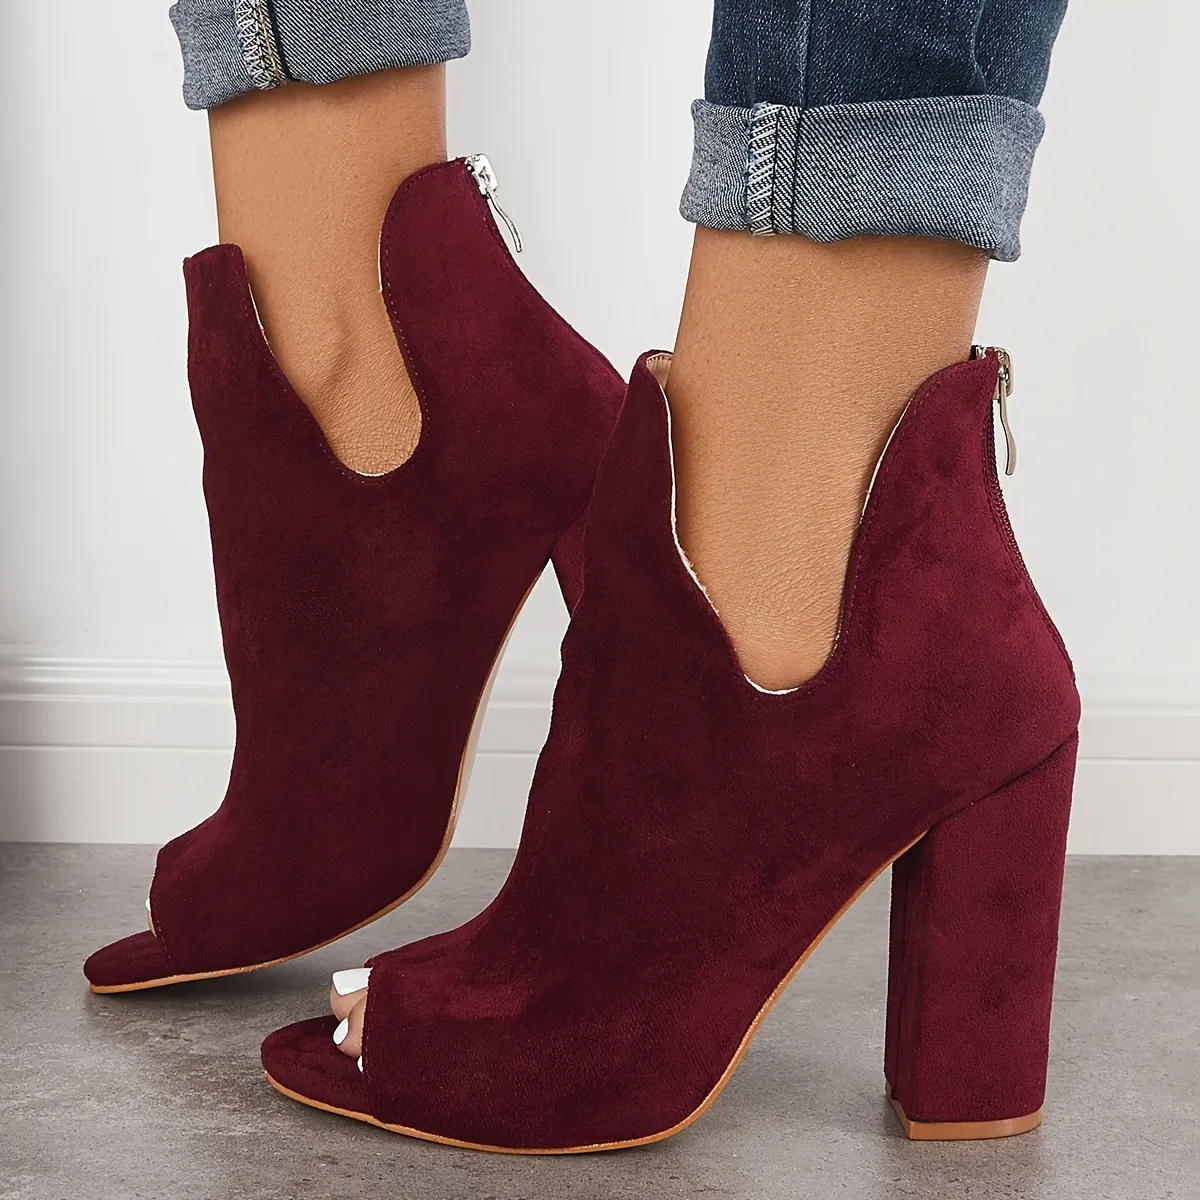 Women's Peep Toe Chunky Heeled Ankle Boots, Cut-out Back Zipper